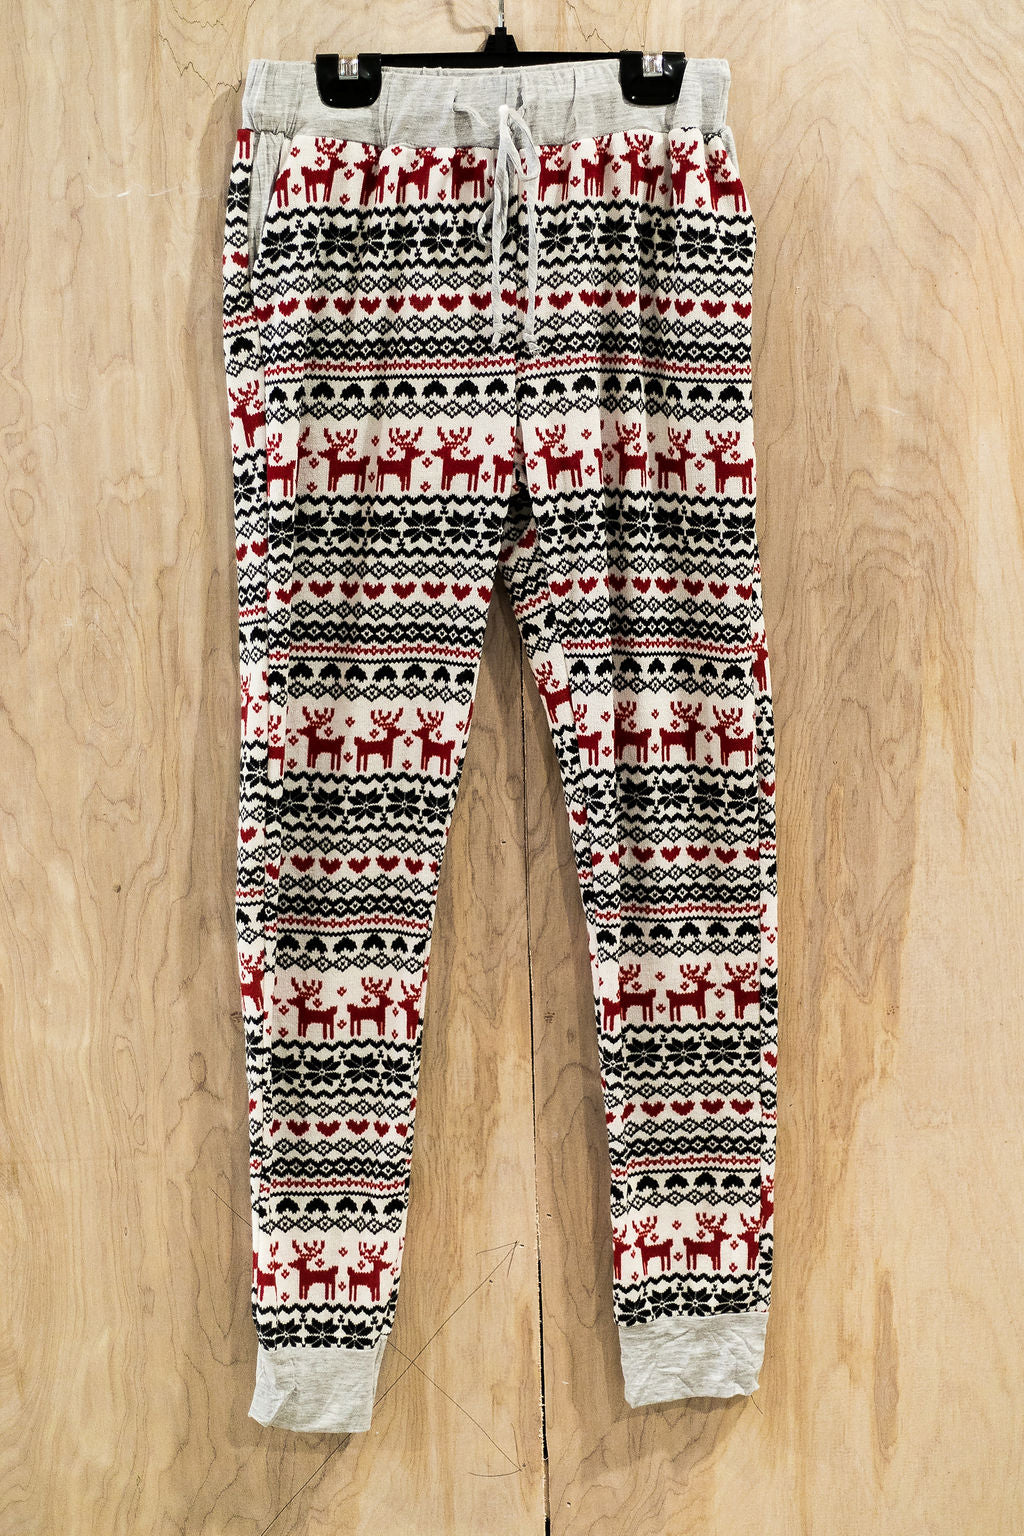 Last Chance Size S & M | For The Win Lounge Jogger Pants with Drawstring Waist in Christmas Reindeer Pattern - Giddy Up Glamour Boutique